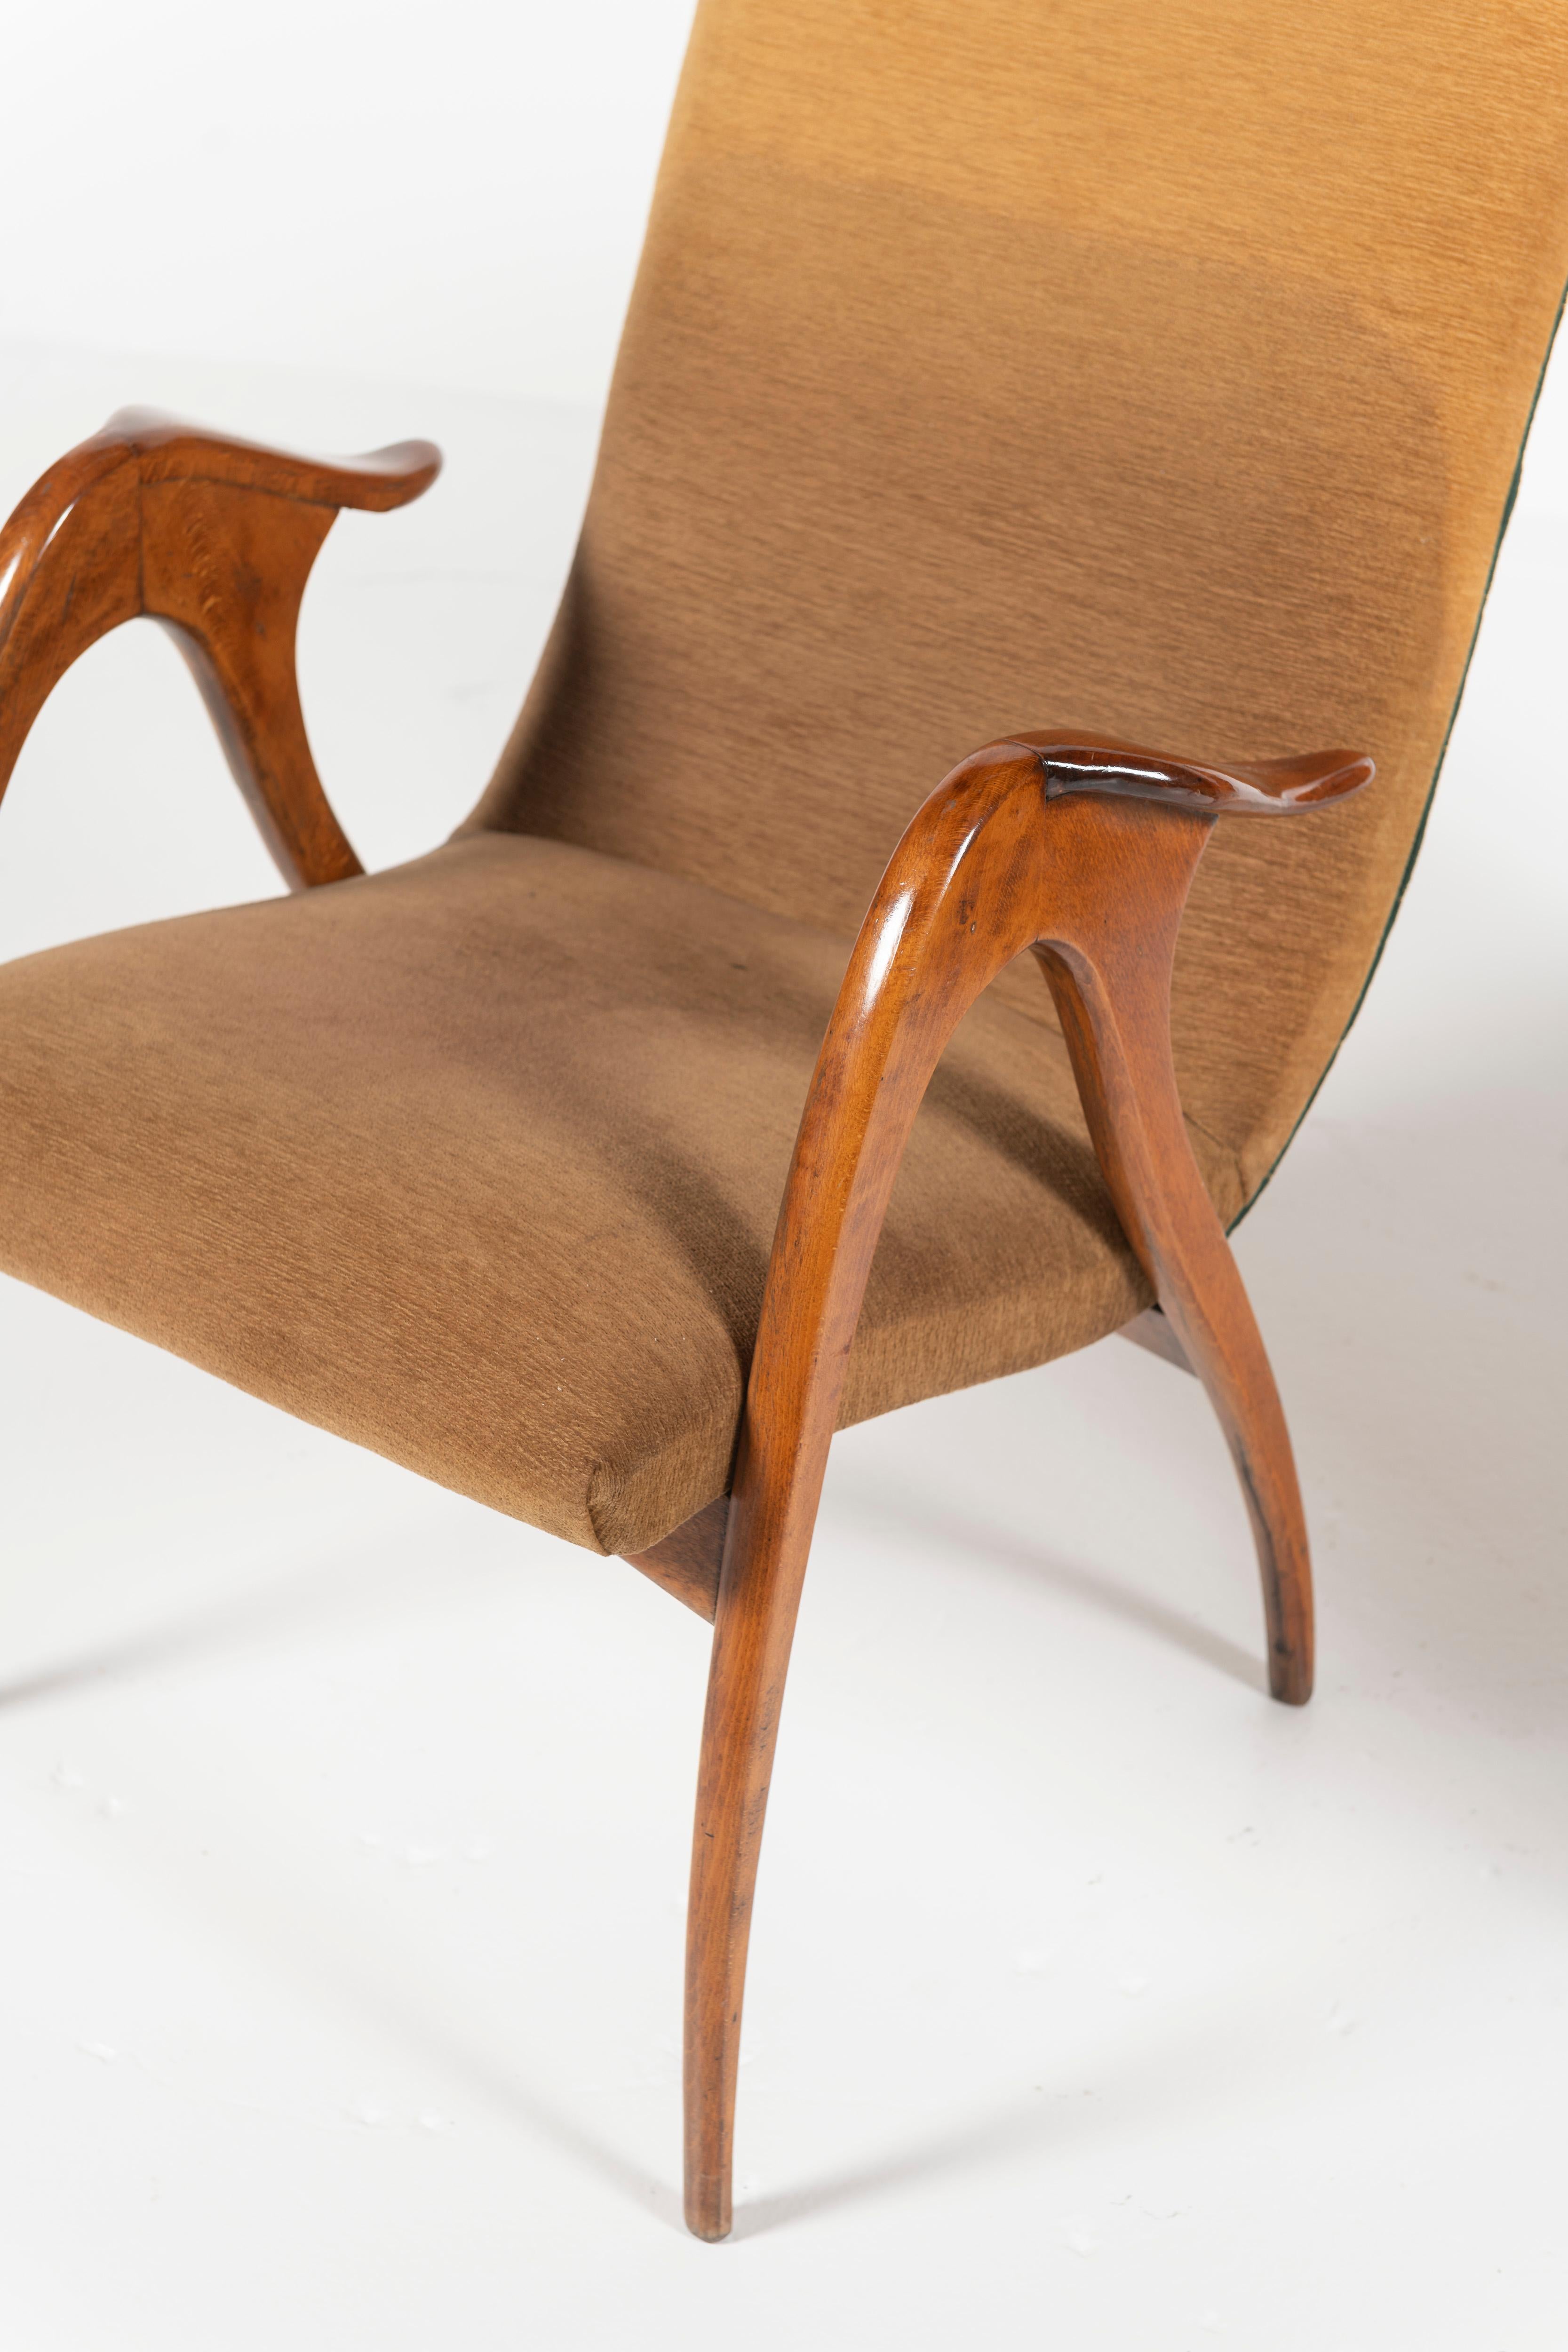 Pair of Vintage Malatesta & Mason Walnut and Upholstery Armchairs, Italy, 1950s For Sale 5